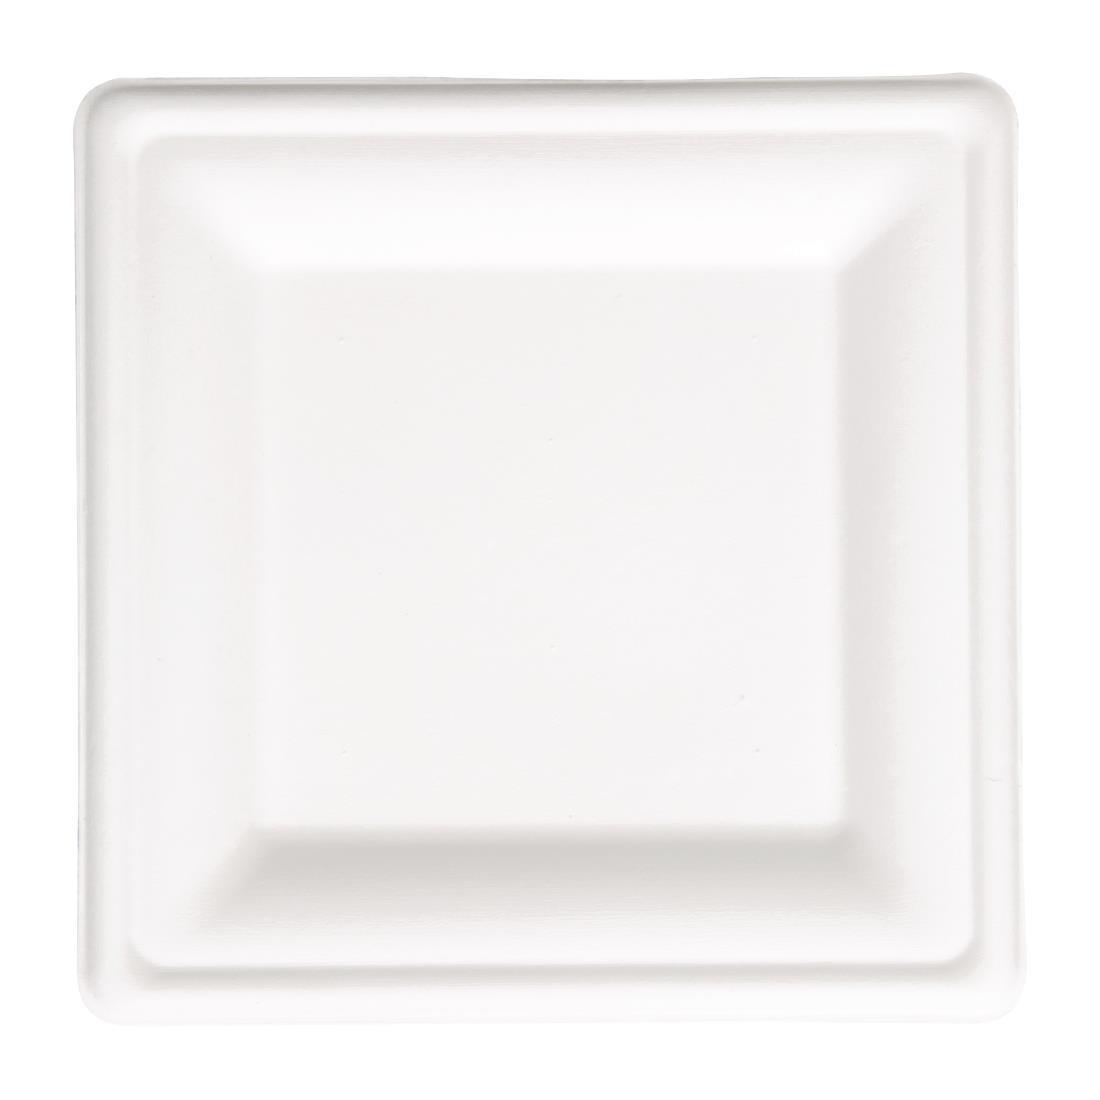 Fiesta Compostable Bagasse Square Plates 261mm (Pack of 50) - FC520  - 3